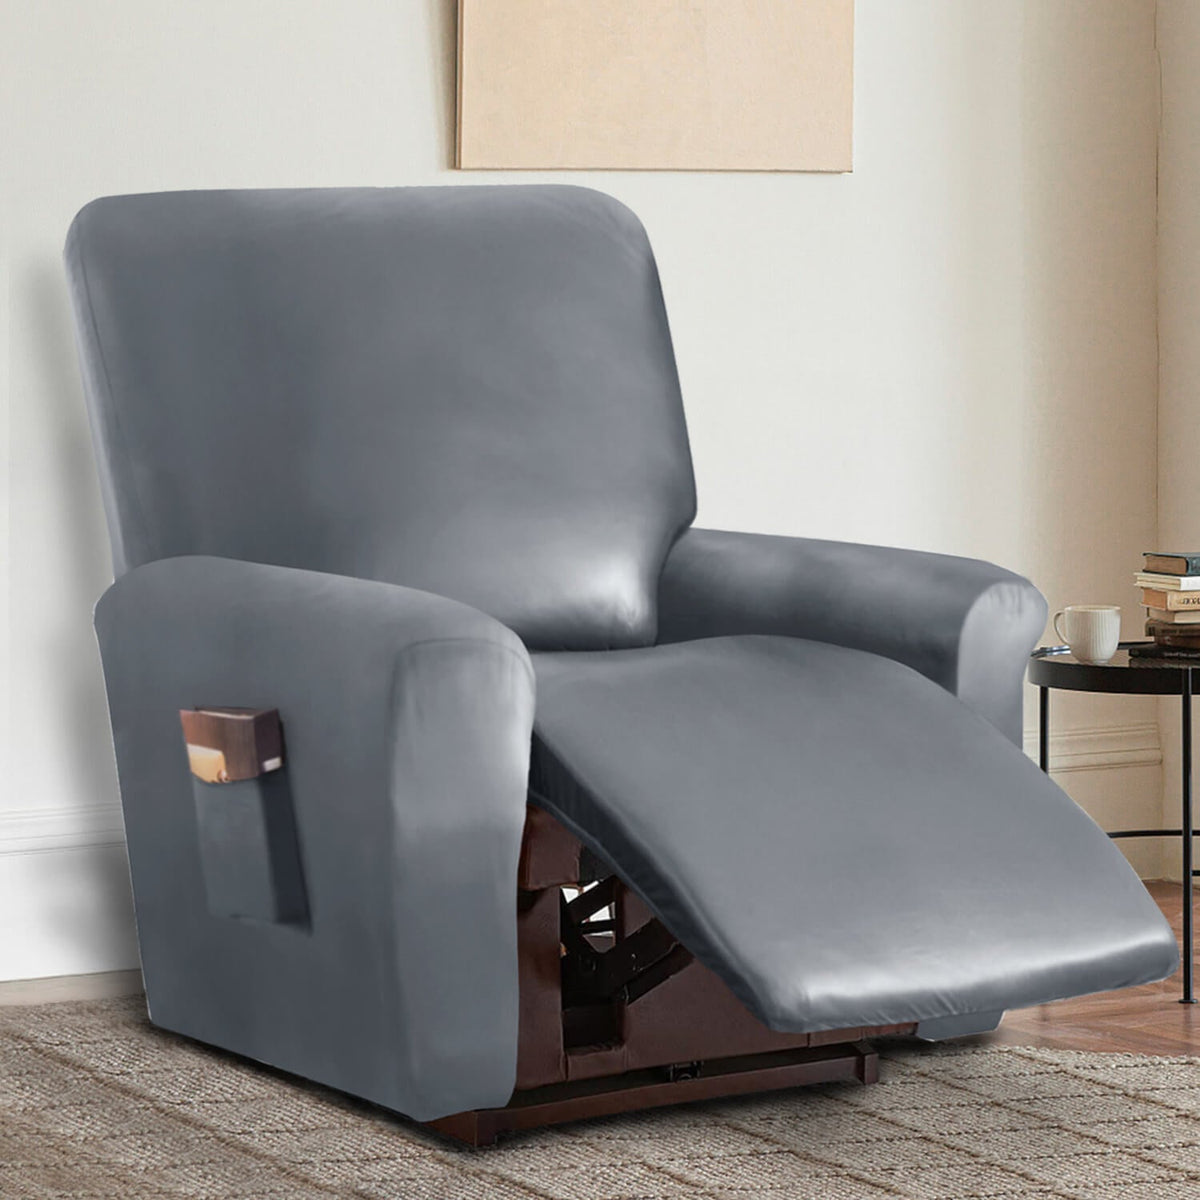 Crfatop Waterproof PU Leather Recliner Slipcover Recliner1-seaterGrey